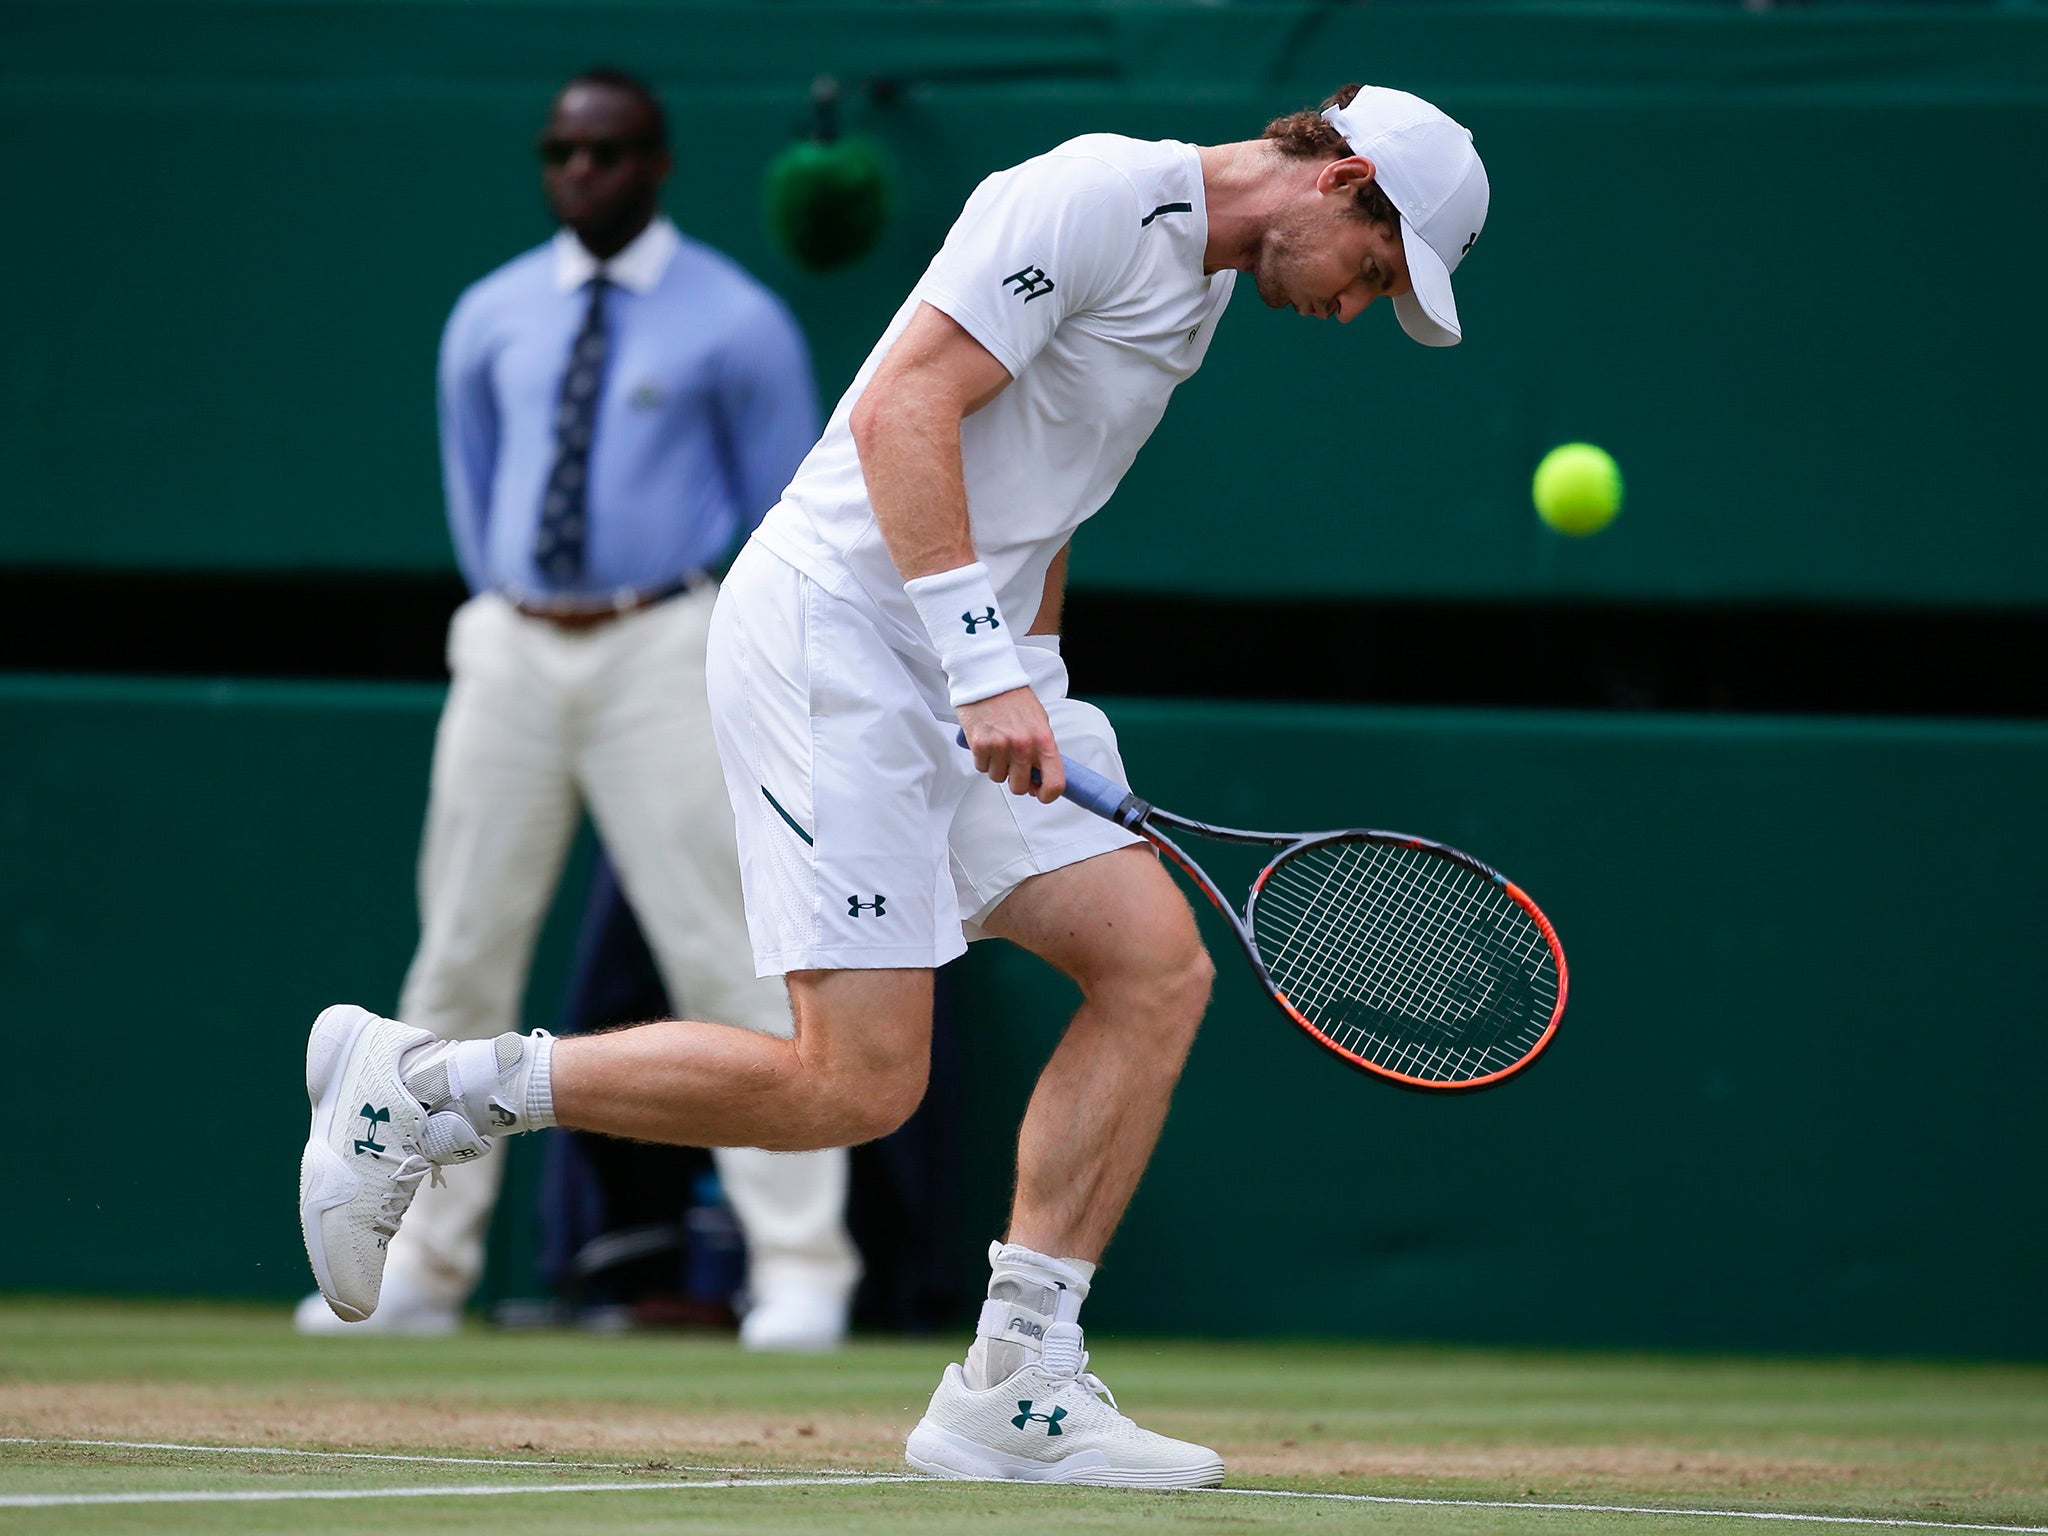 Andy Murray hasn't played since losing at Wimbledon